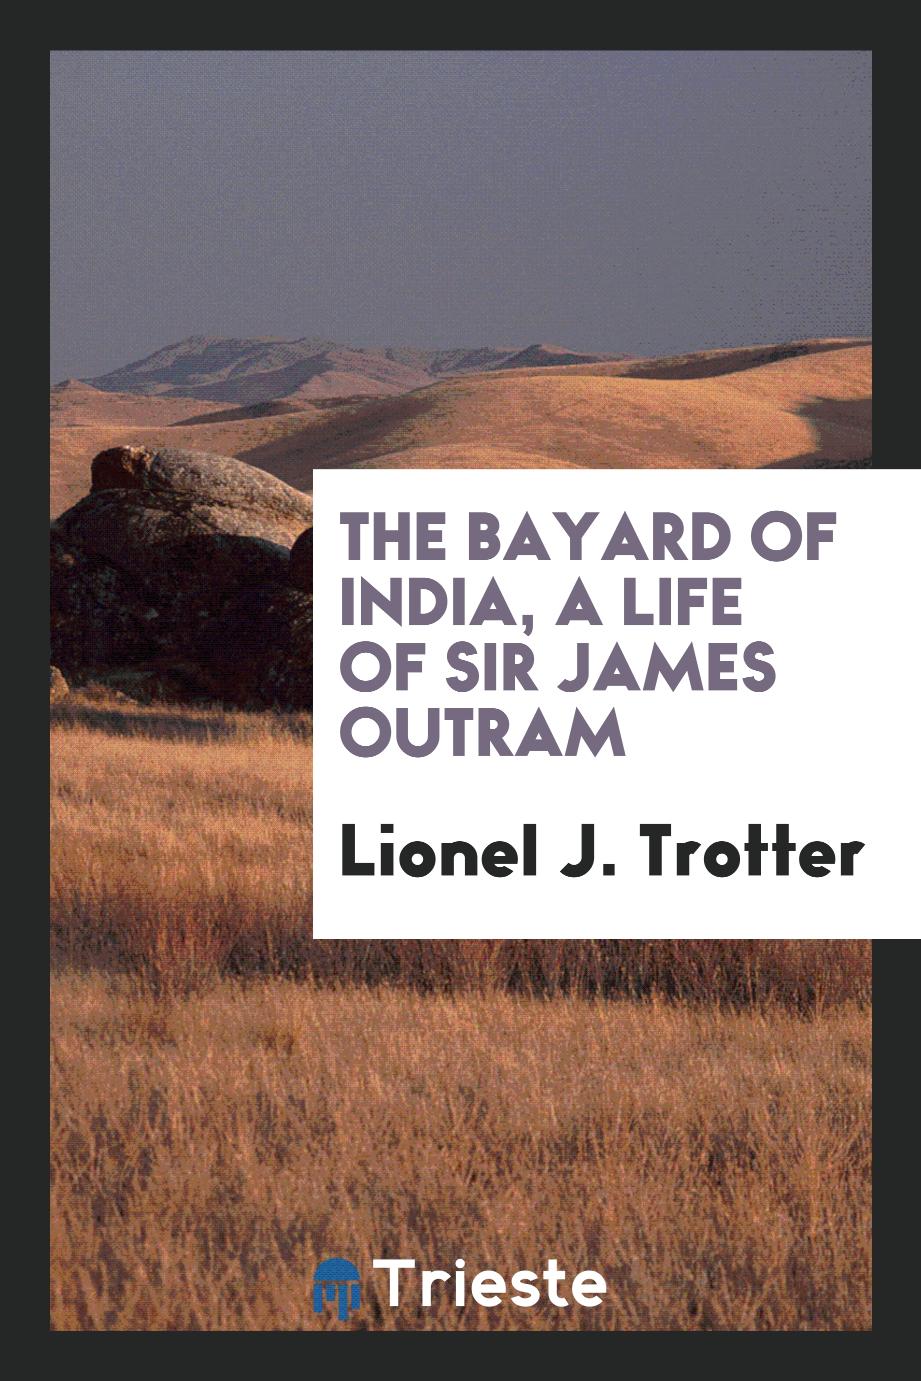 The Bayard of India, a life of Sir James Outram